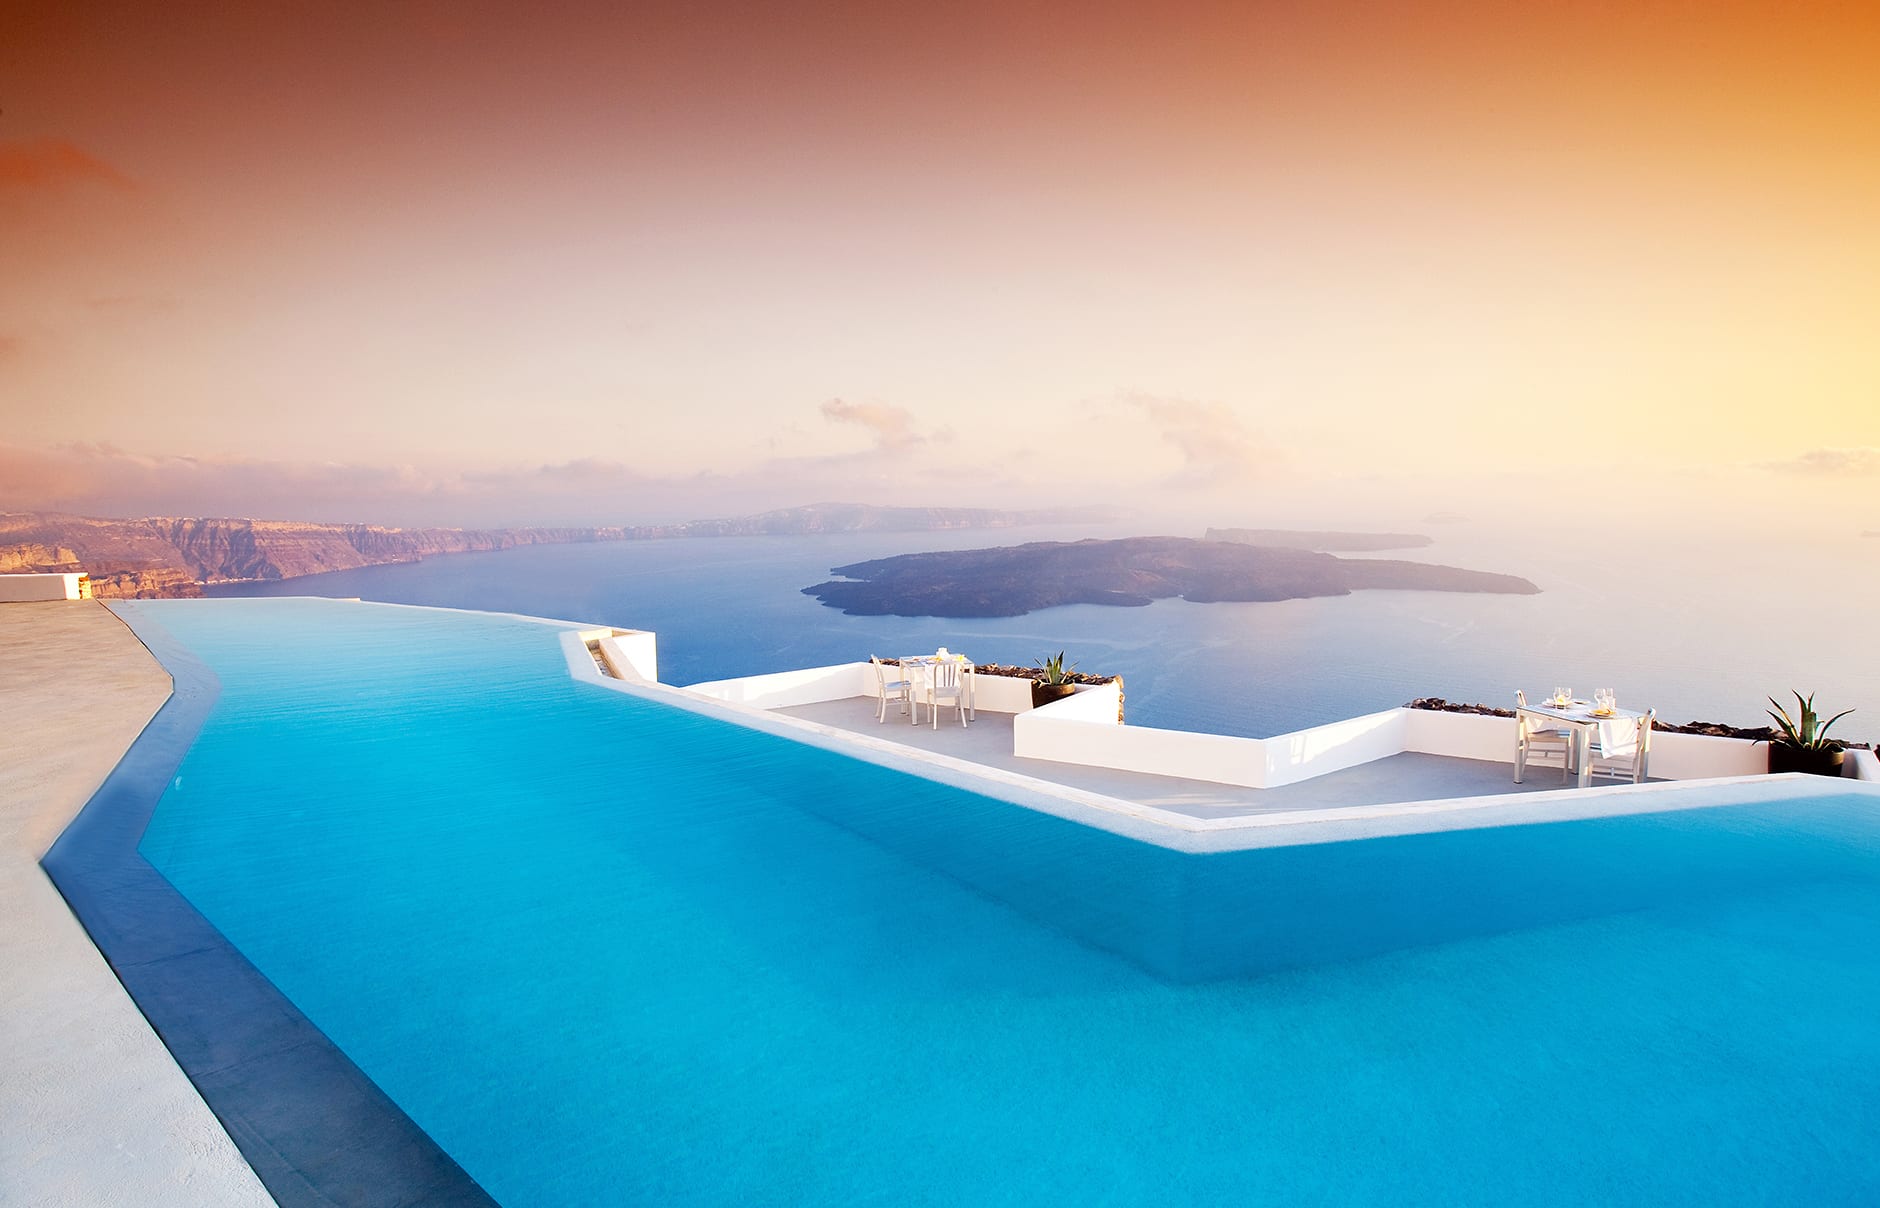 Infinity pool. Grace Hotel Santorini, Greece. Luxury Hotel Review by TravelPlusStyle. Photo © Auberge Resorts Collection